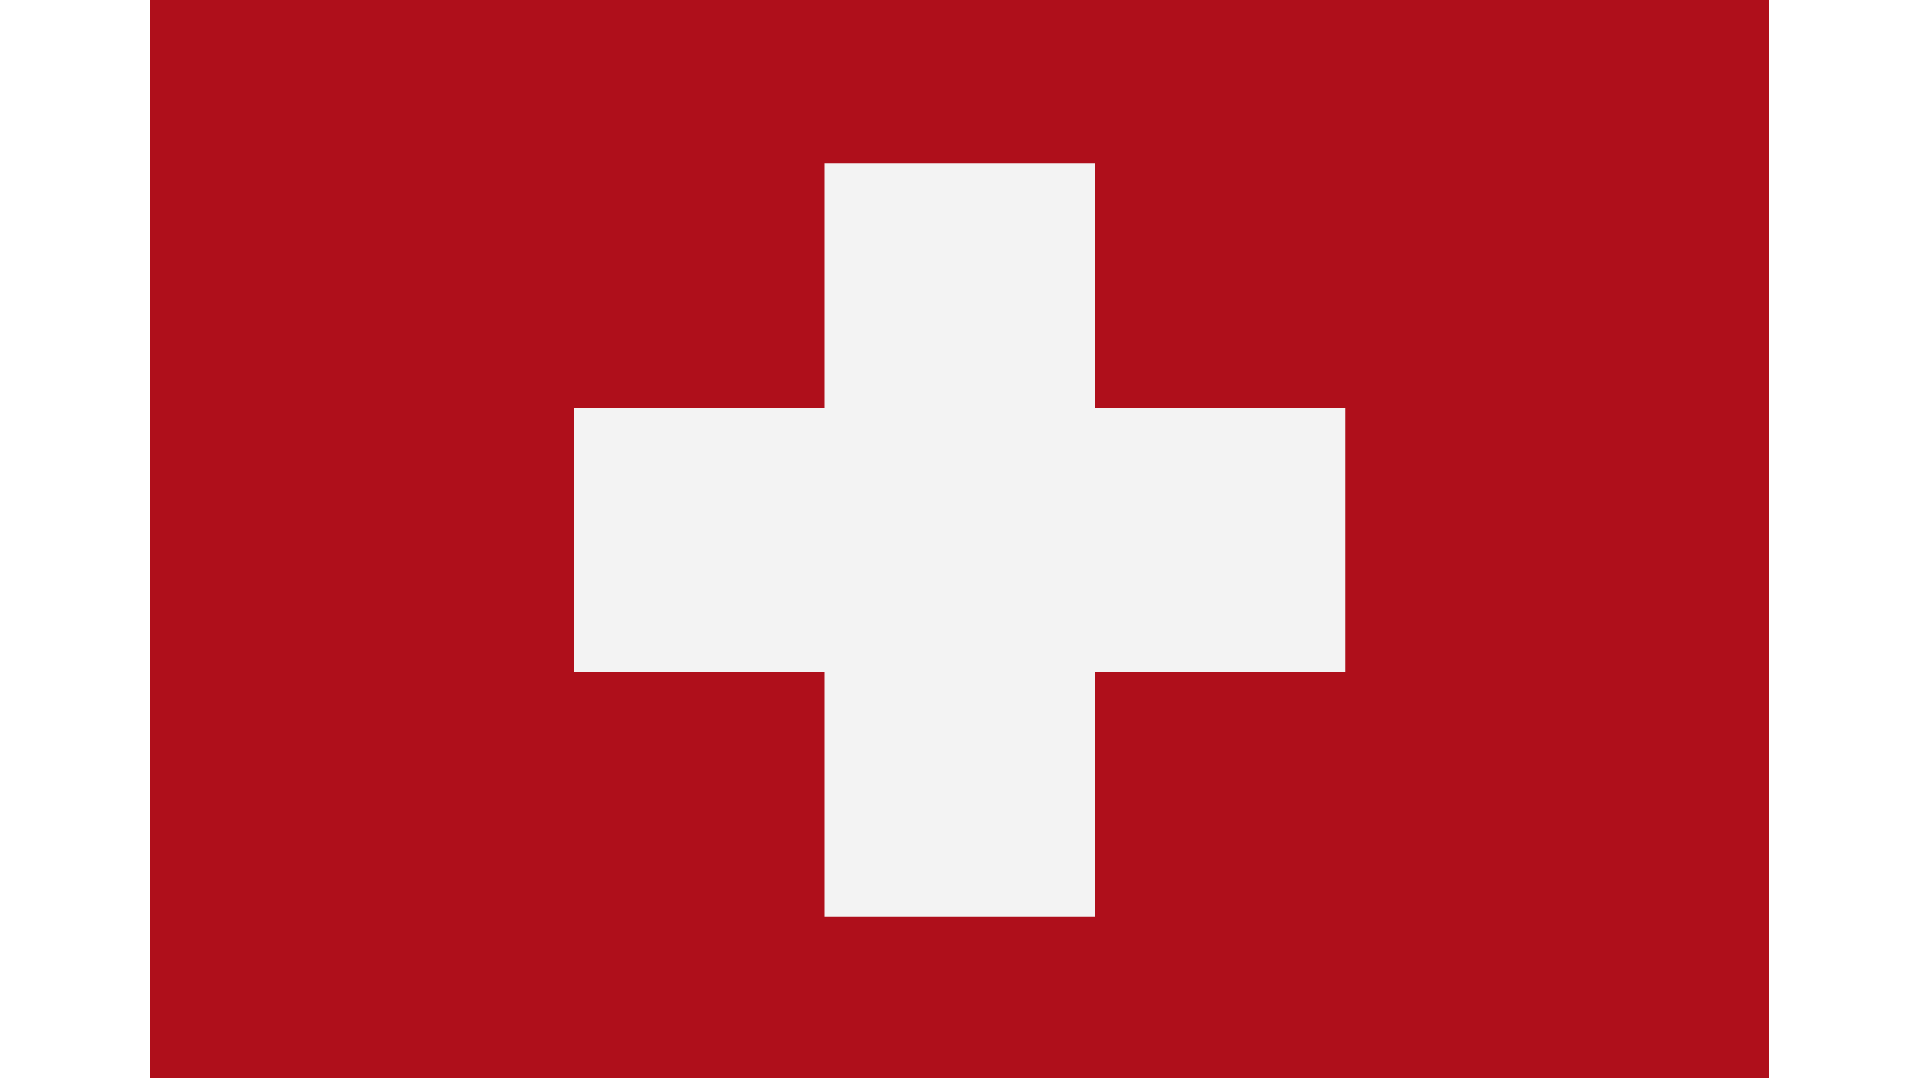 The flag of Switzerland in red with a white cross in the middle.